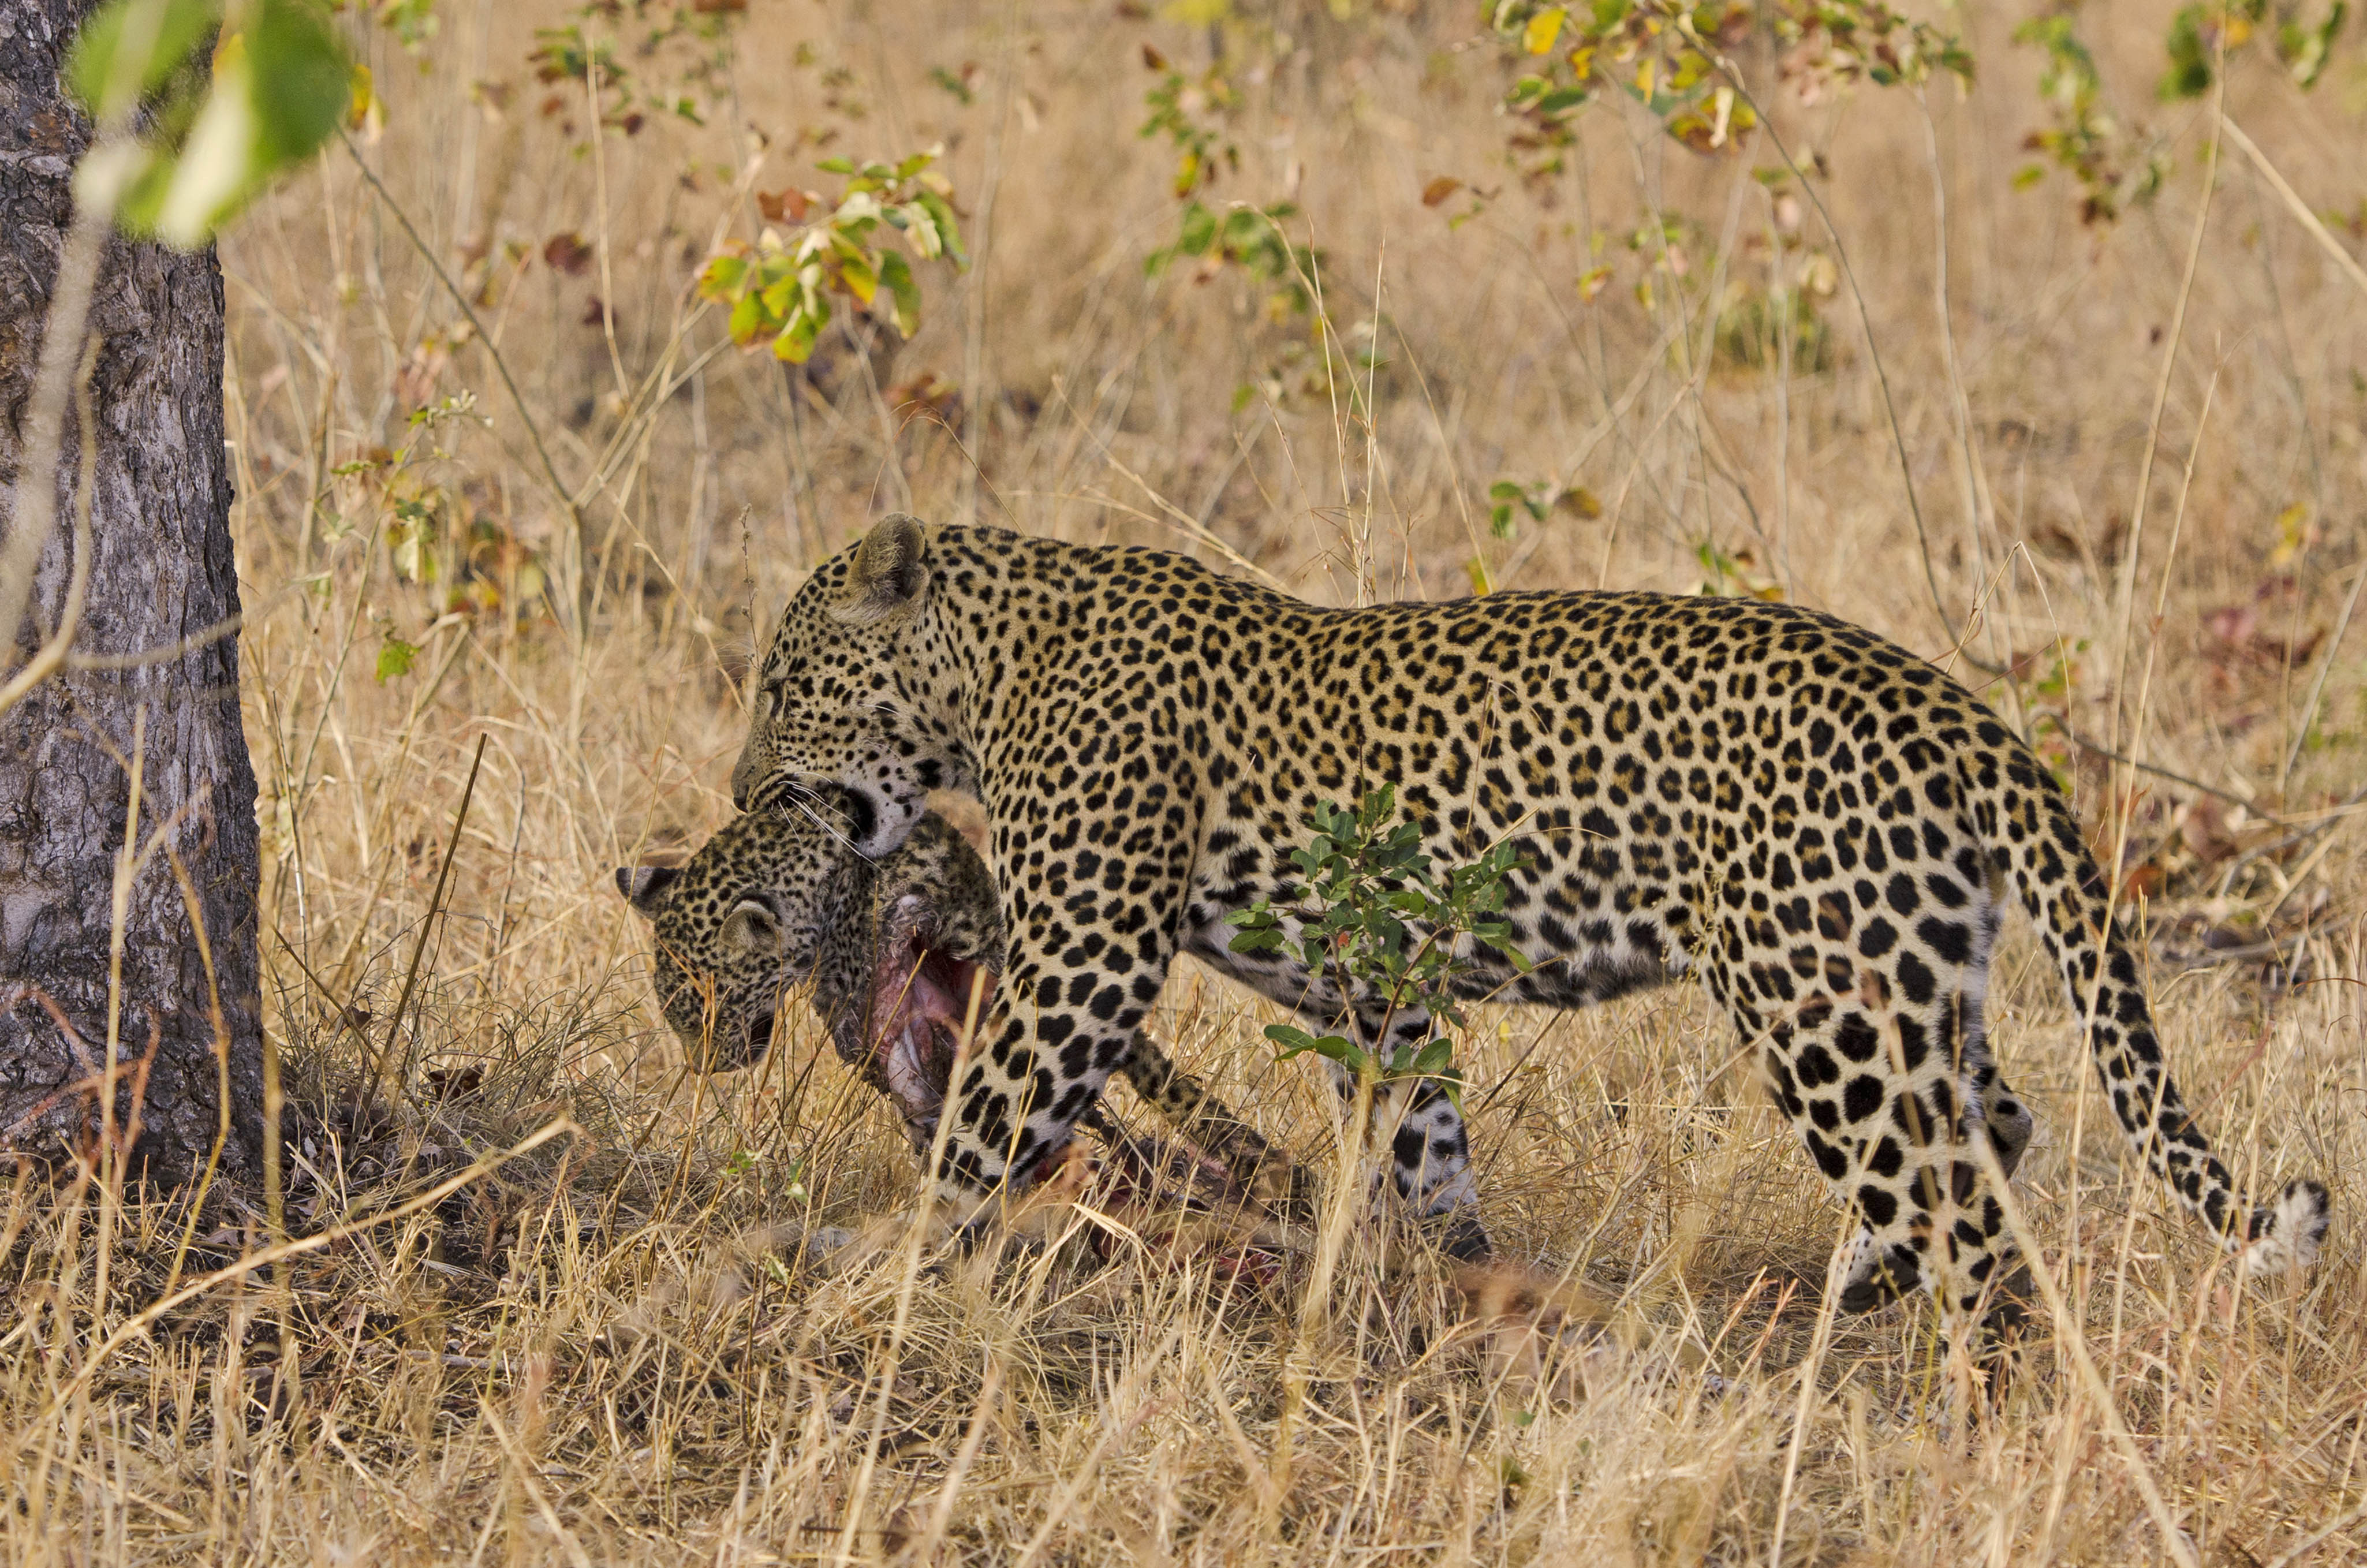 Animal cannibalism as leopard eats another leopard - Caters News Agency